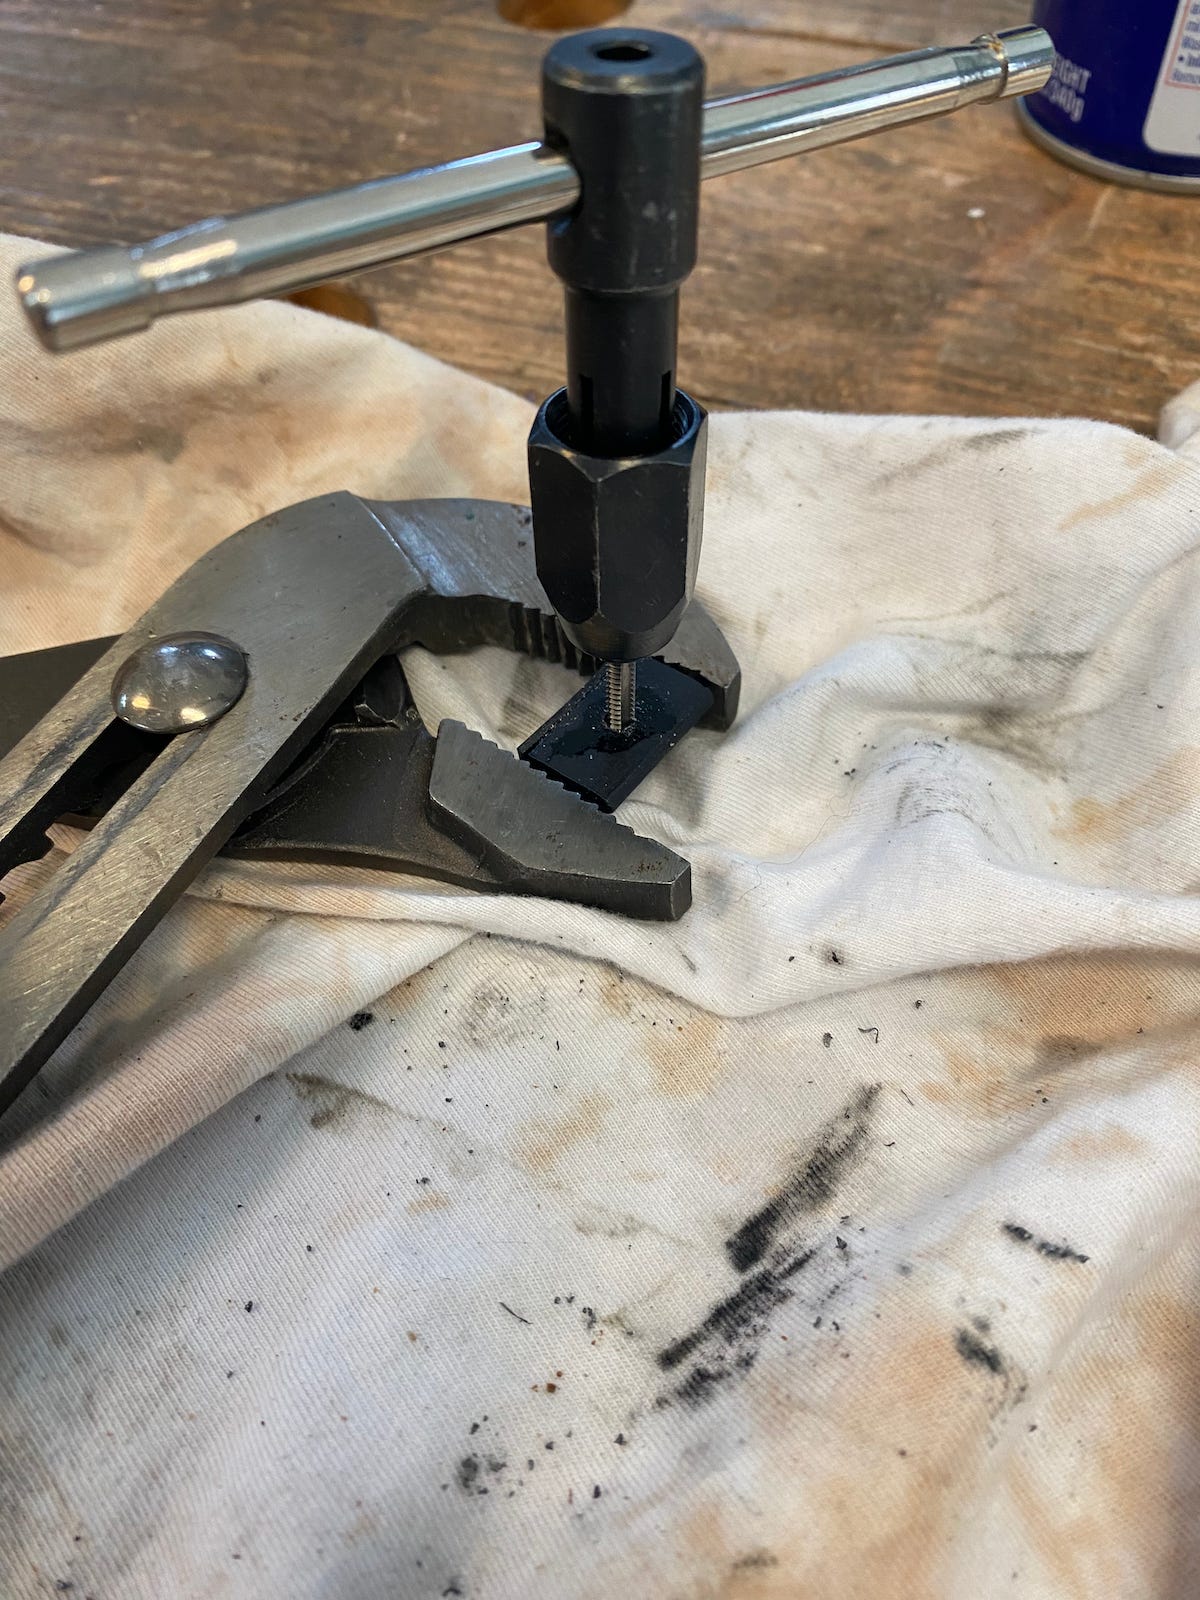 Holding the clip with a wrench, I carefully hand-tapped the hole to create threads. Once I learned how to tap properly, it worked like a charm.